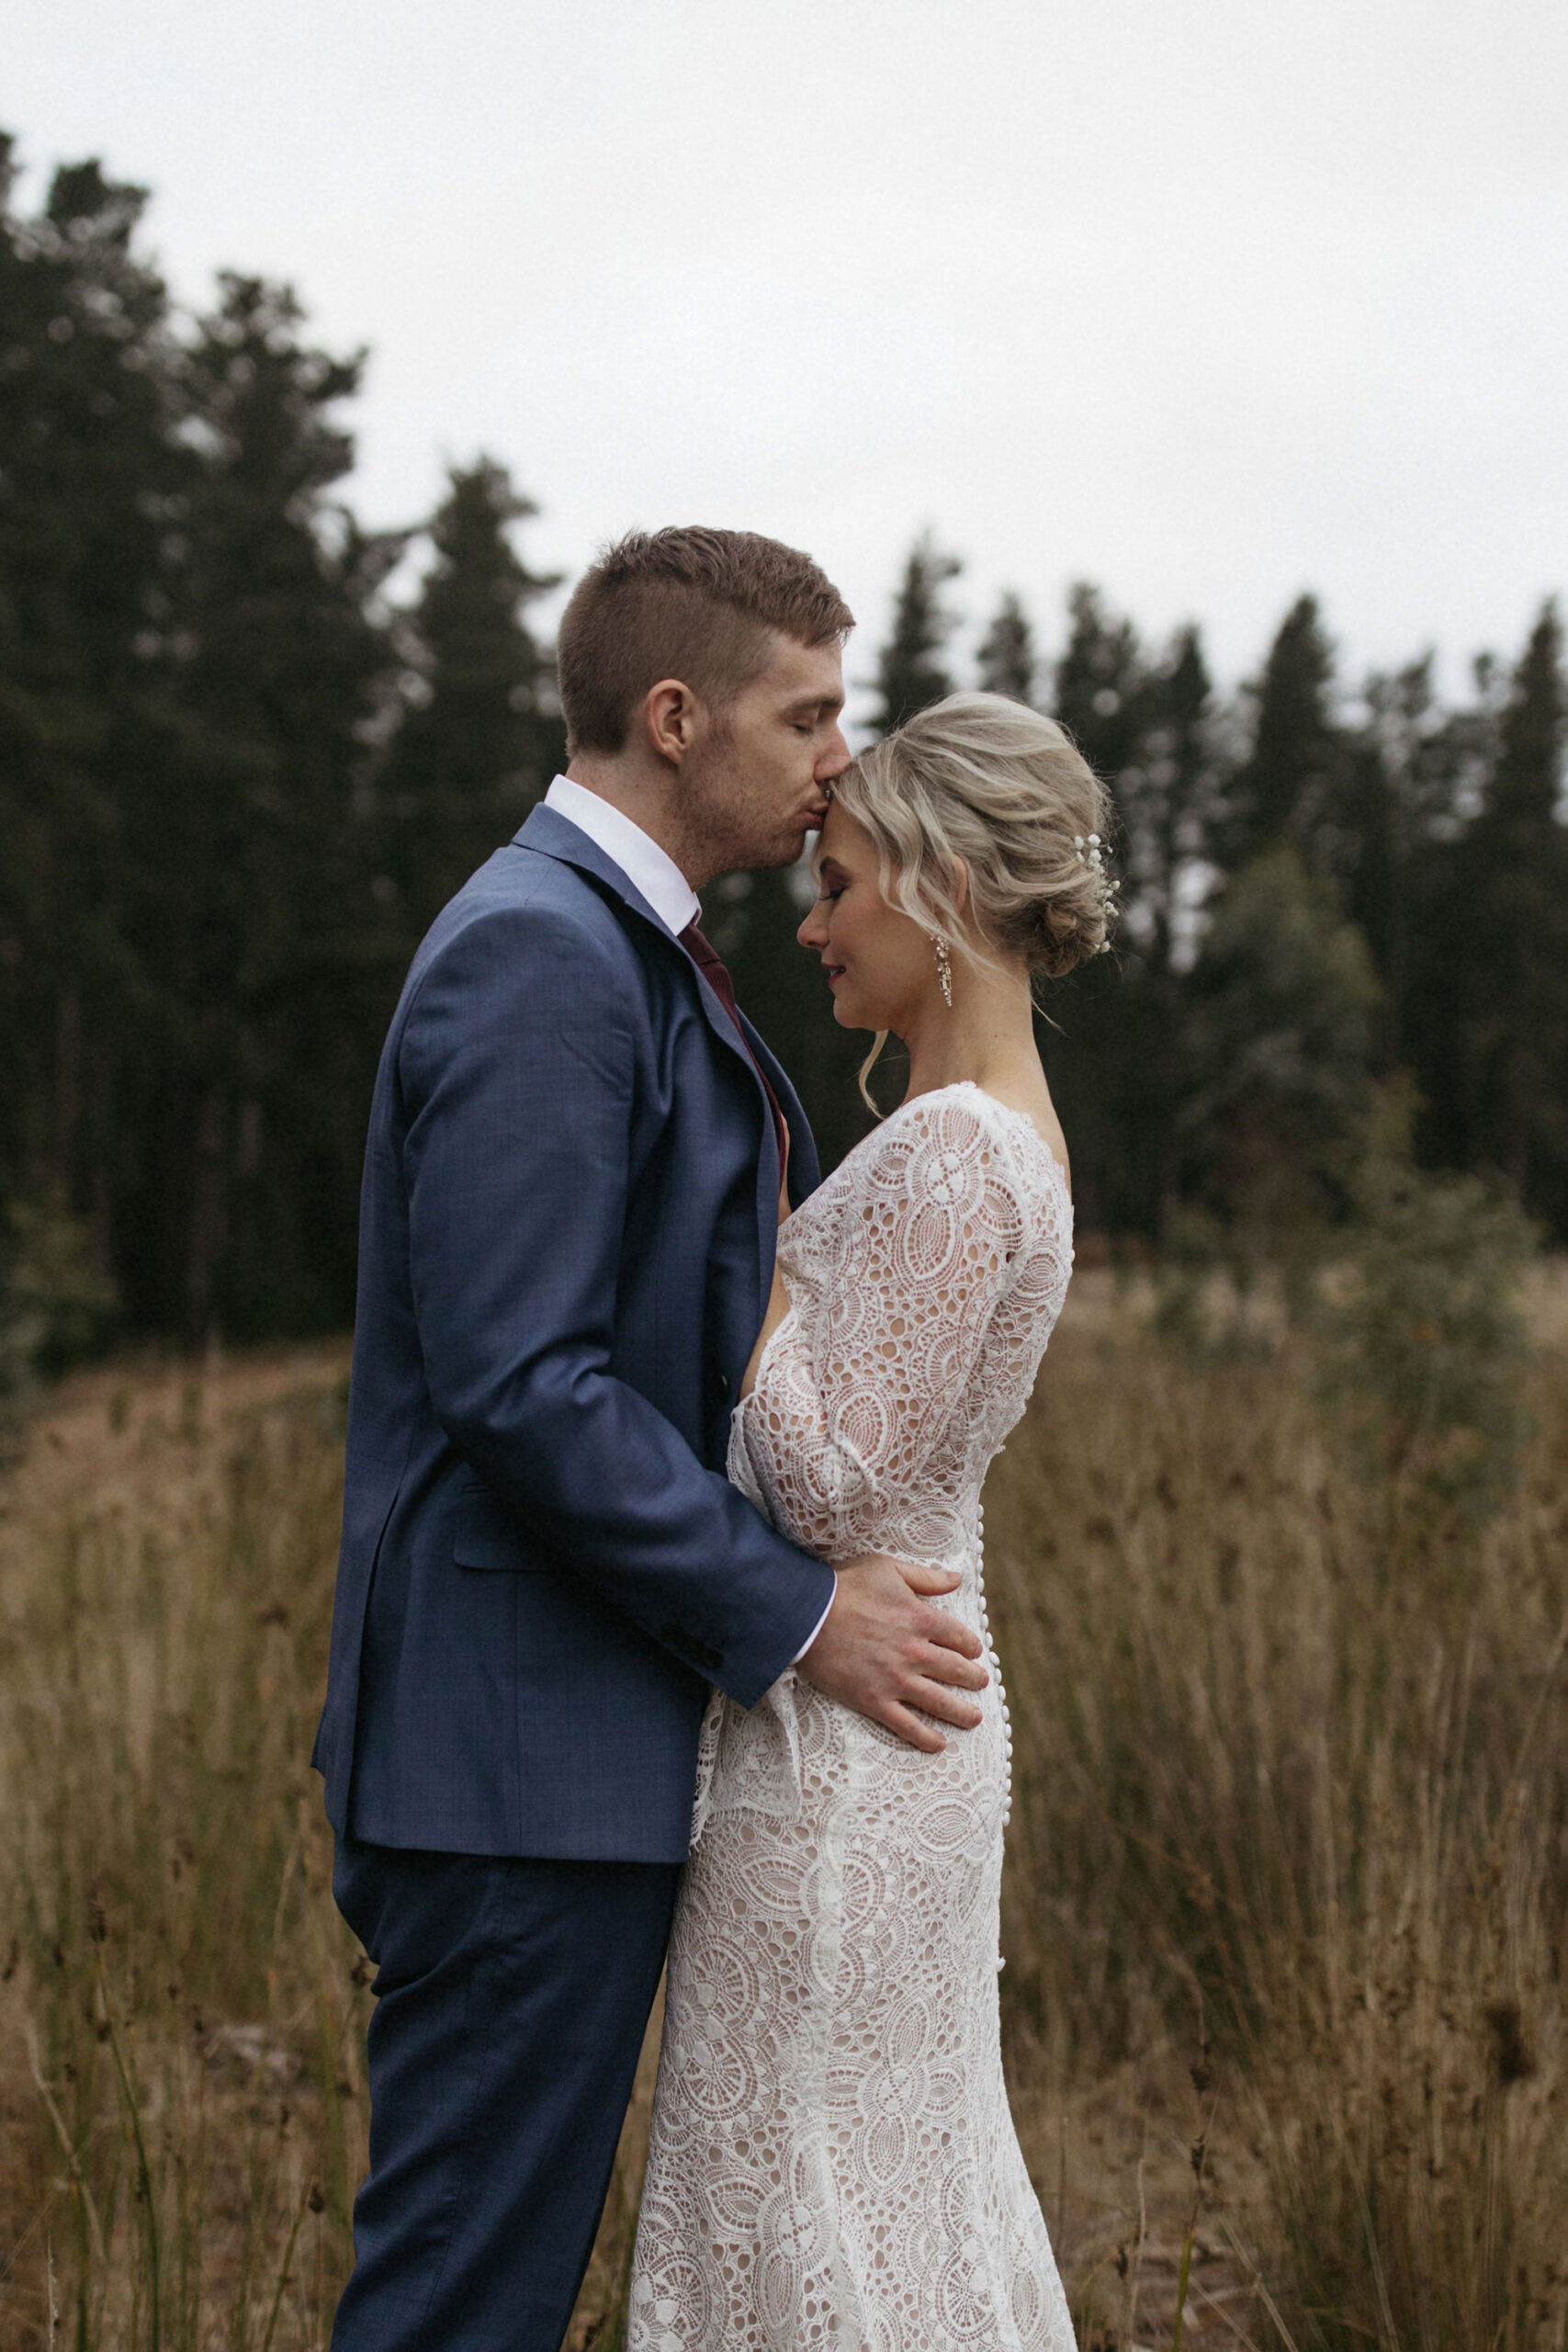 Bec Shaan Forest Country Wedding Dan Evans Photography SBS 028 scaled